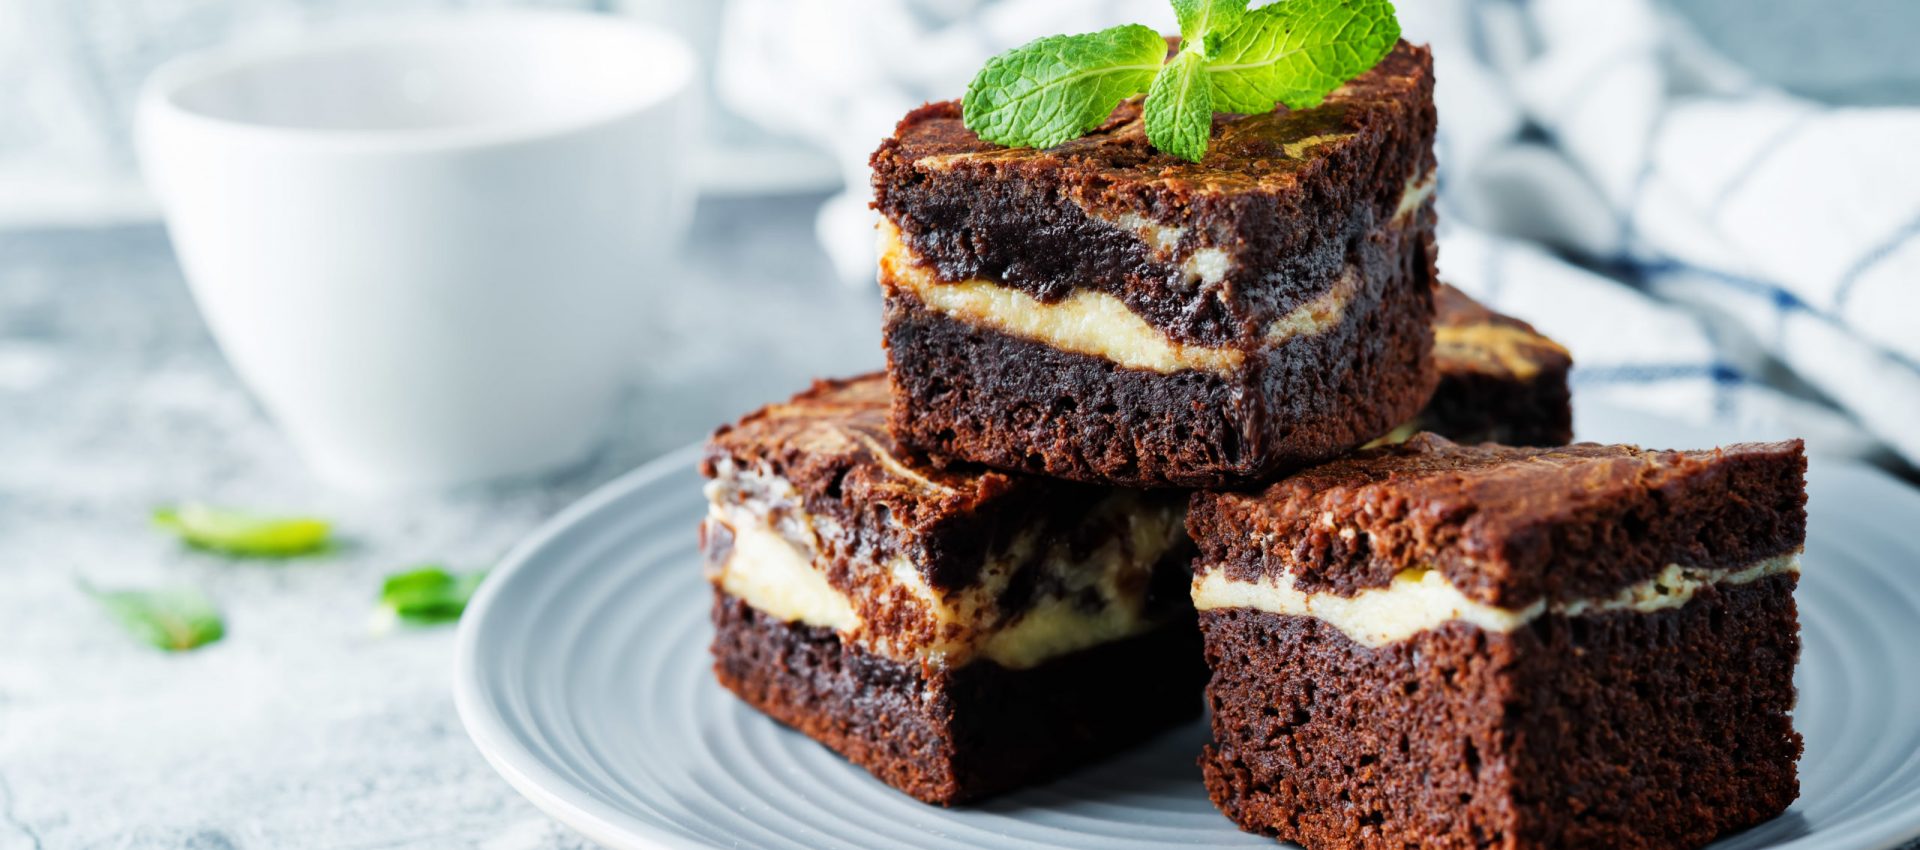 Cream cheese chocolate brownie with mint leaves